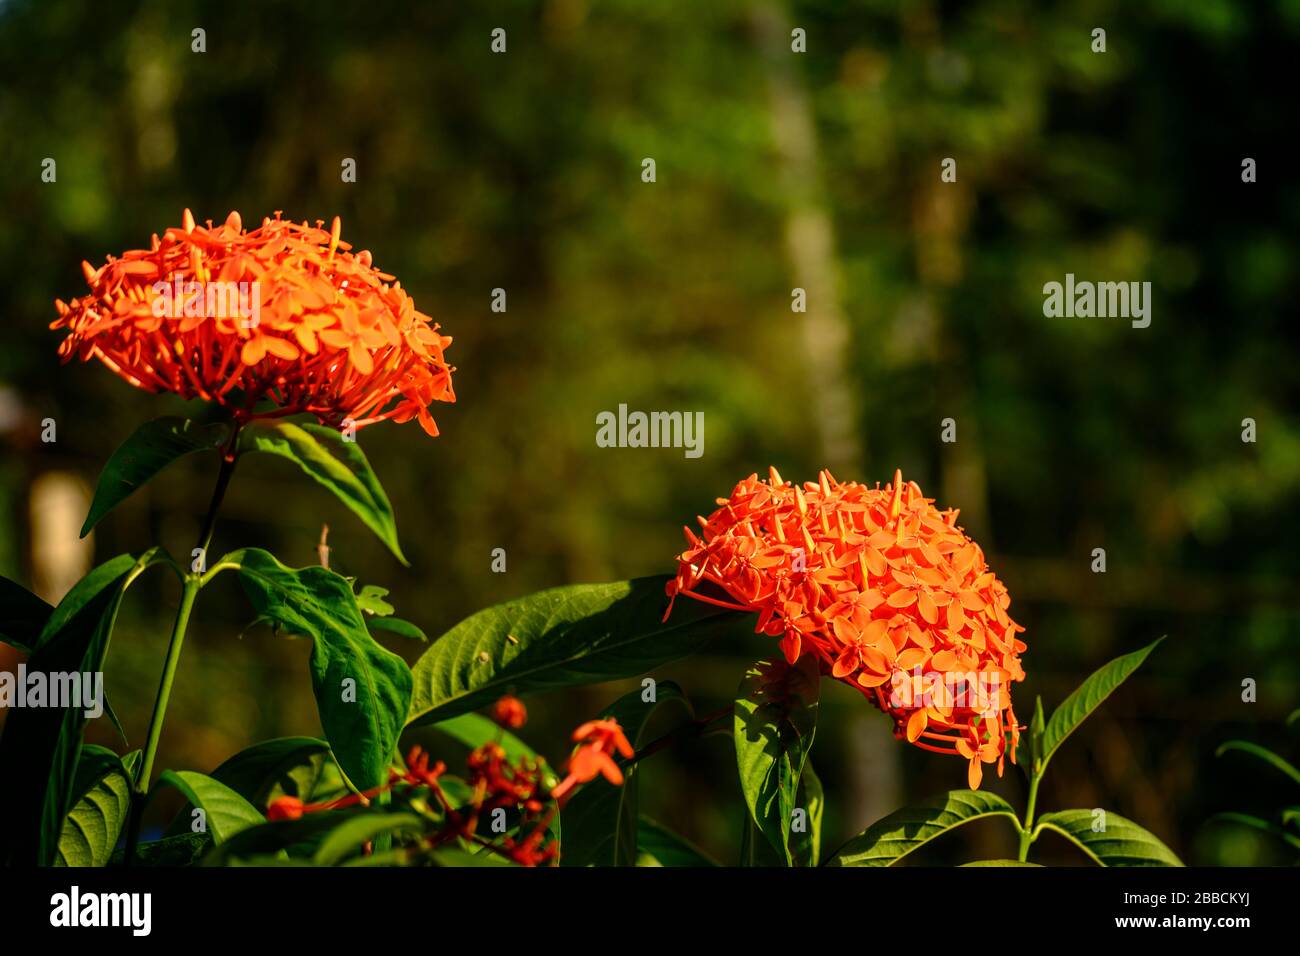 Red flower cluster of Ixora coccinea (Flame of the Woods - 'Dwarf Red') Stock Photo